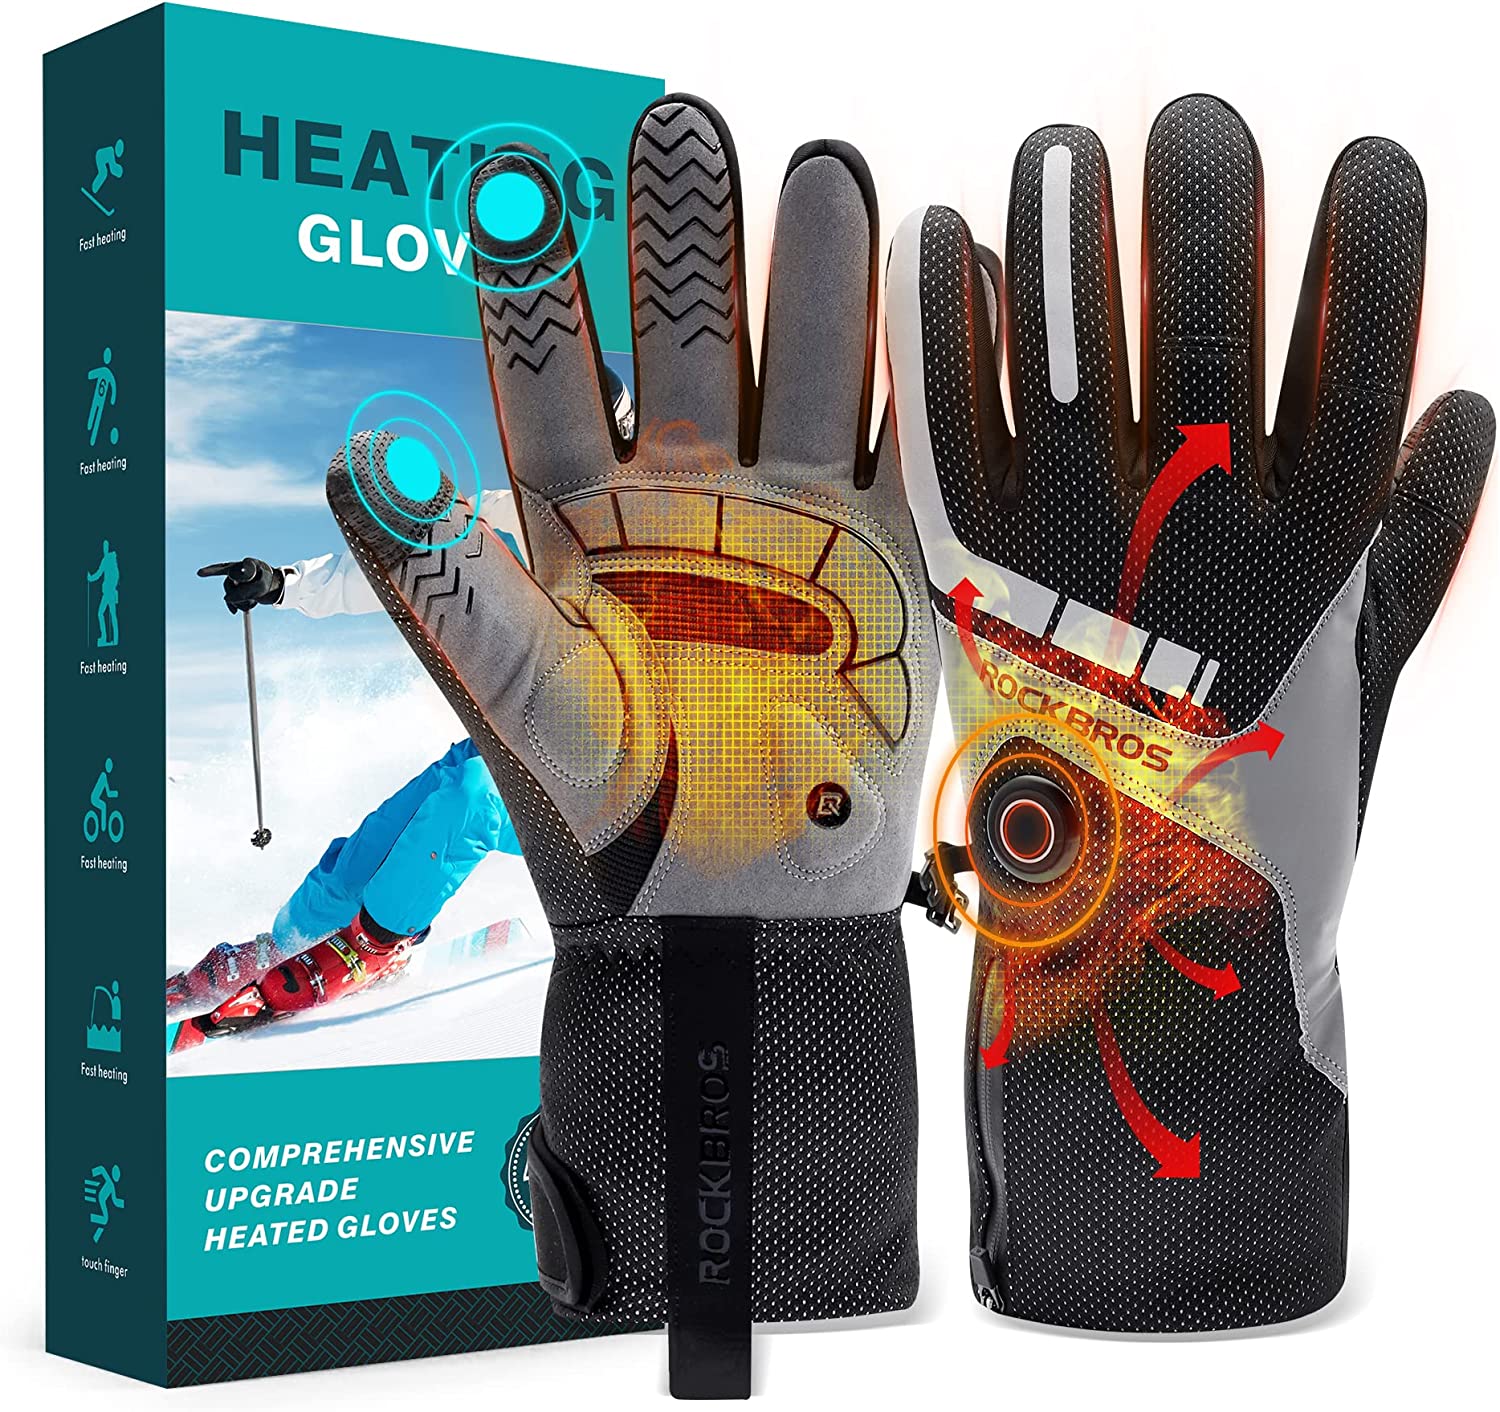 True Rechargeable Electric Heated Thermal Gloves w/ 8 Hrs 4000mAh x2  Hi-Capacity Li-on Batteries, Unisex Extra Thick Waterproof Windproof Fast  Heating Hand Warmers for Men Women Winter Ski Motorcycle, Fishing Gloves 